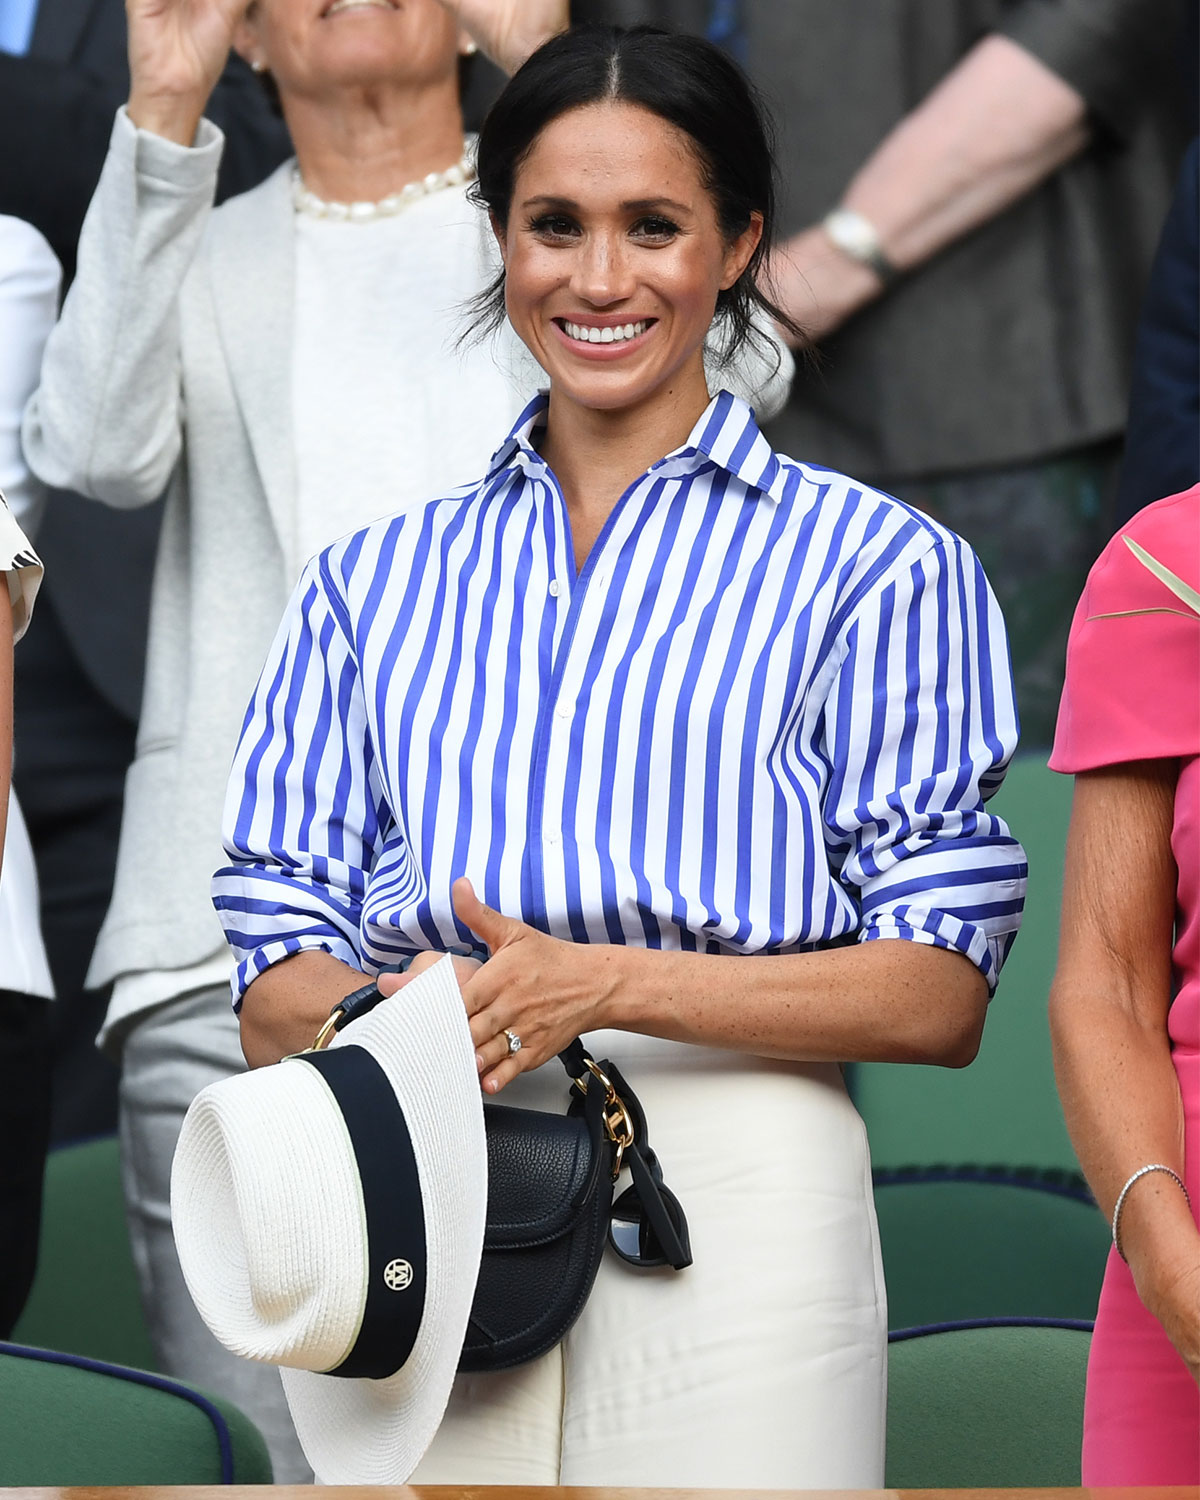 71 Stunning Meghan Markle Outfits That Leave Us Speechless - SHEfinds